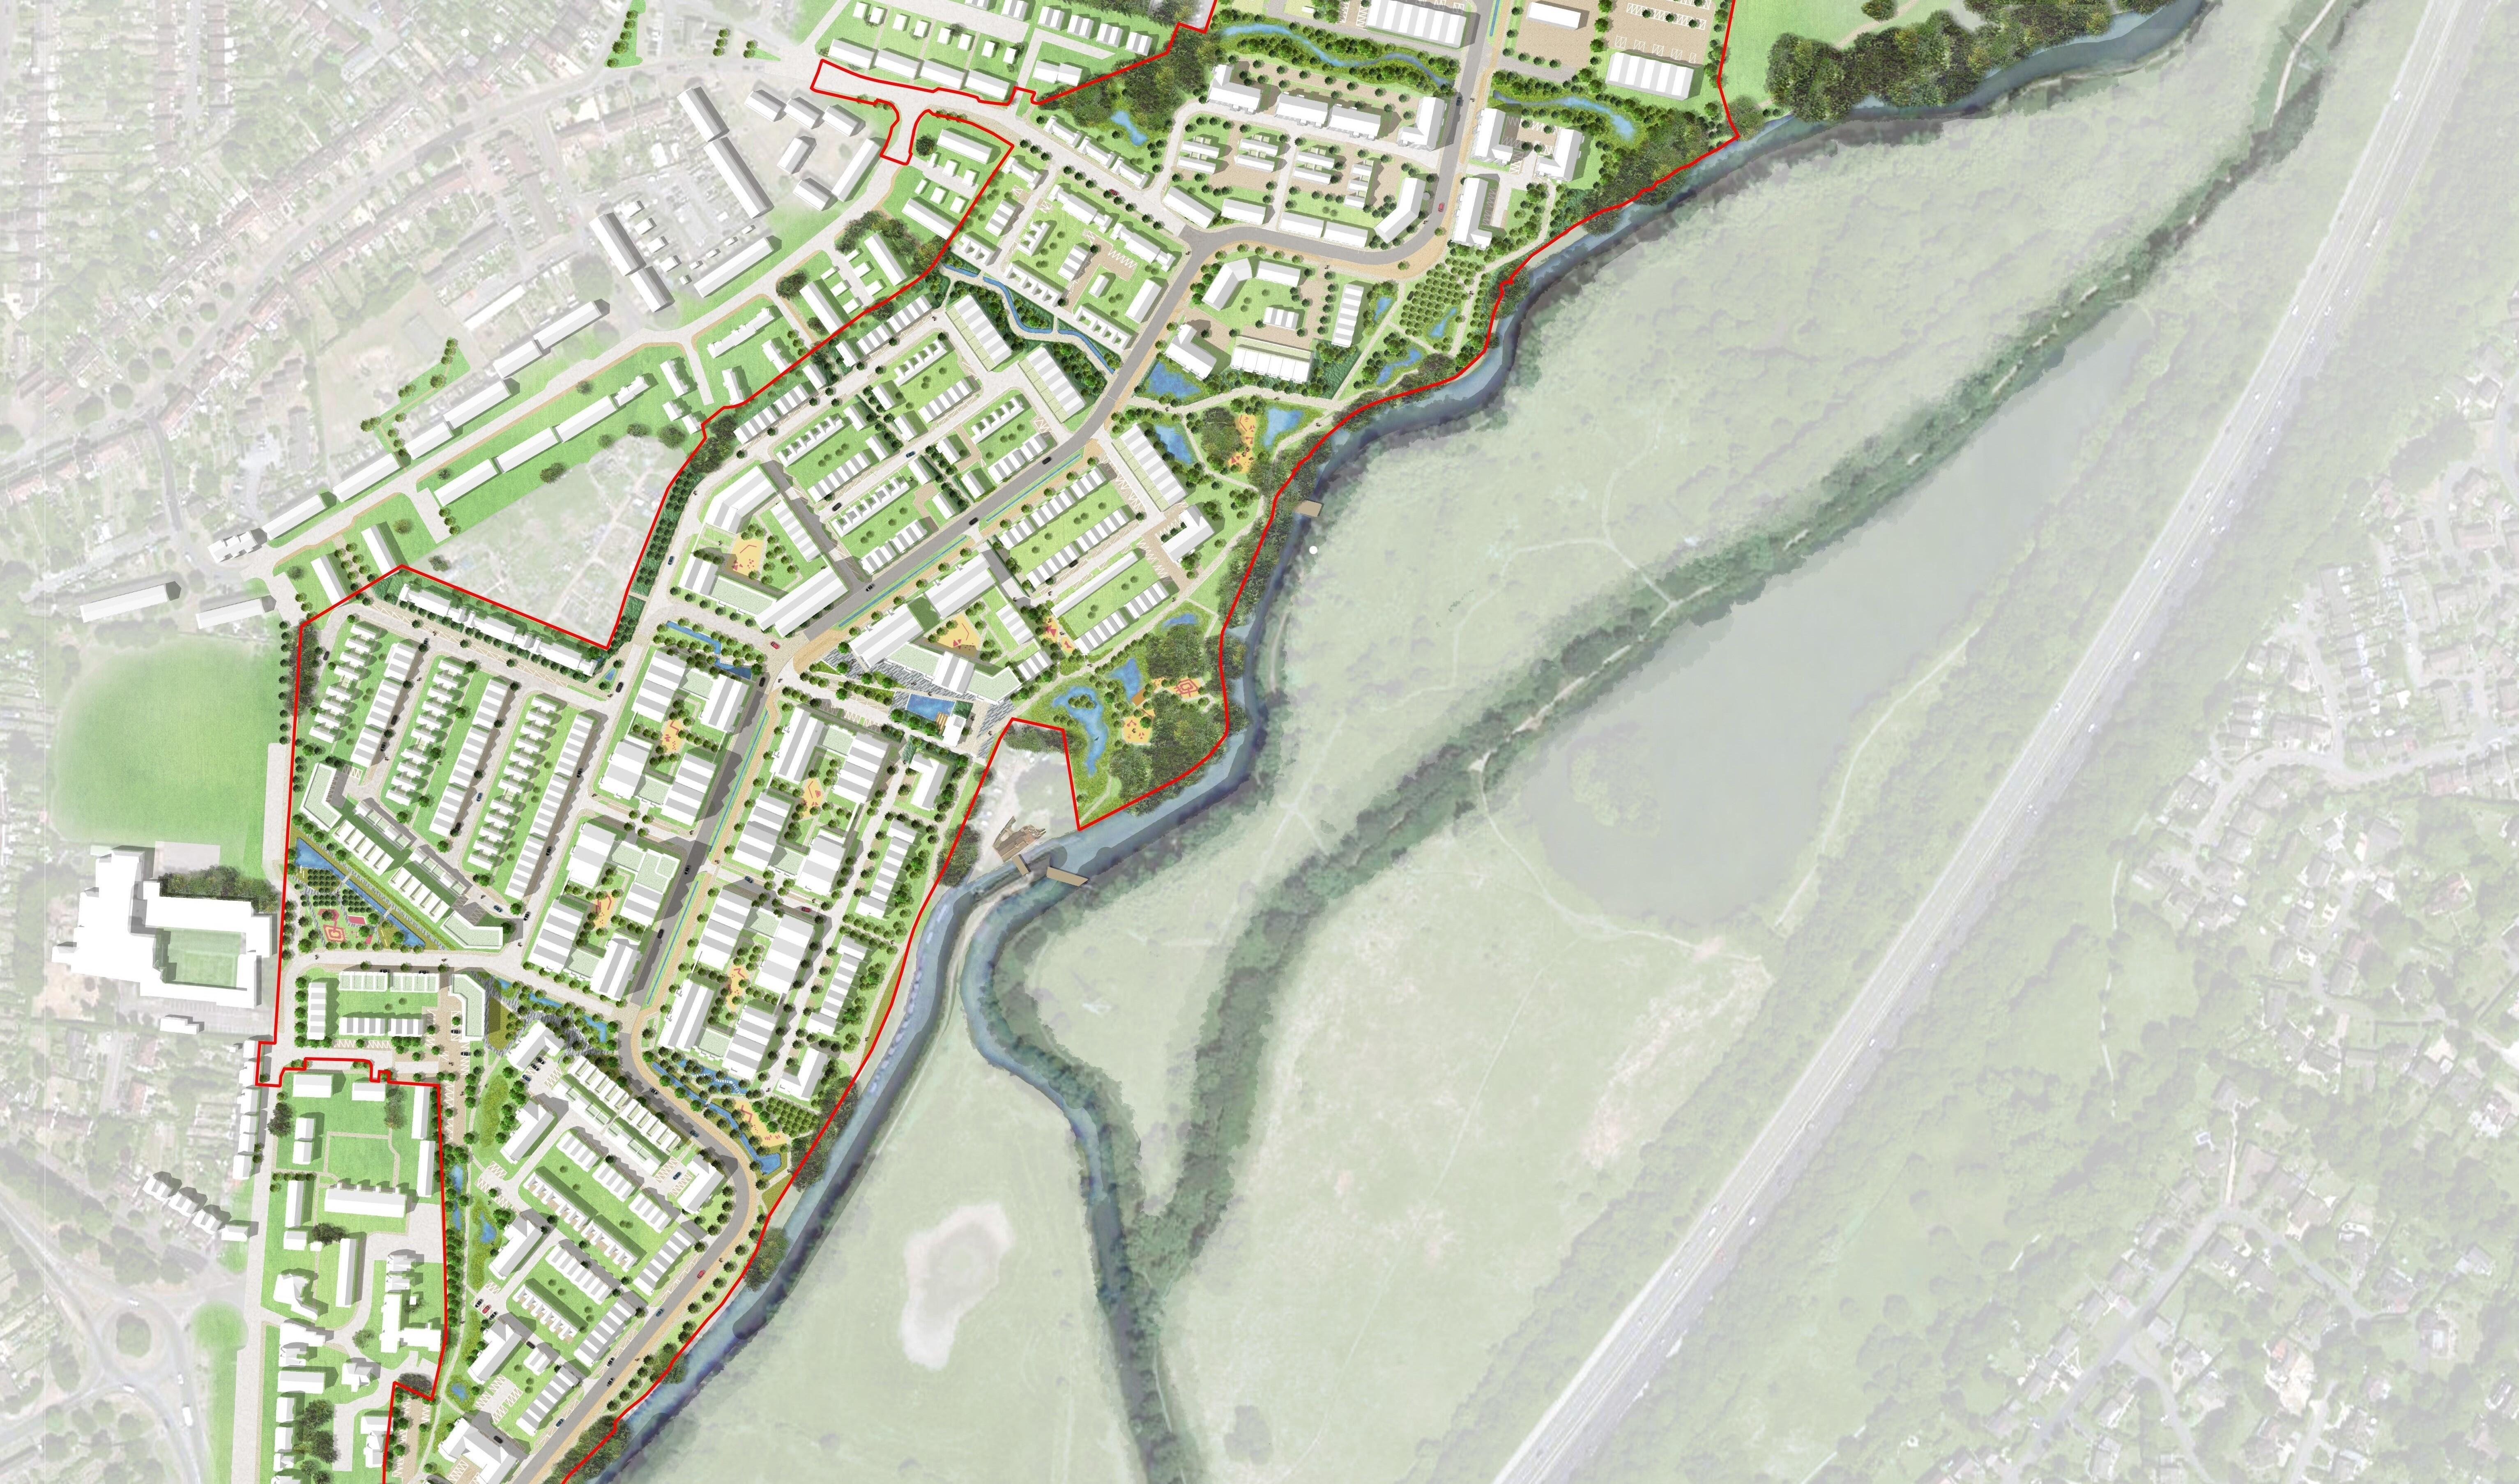 An illustrative masterplan showing the proposed landscape and development alongside the existing river at Weyside. © BMD & JTP